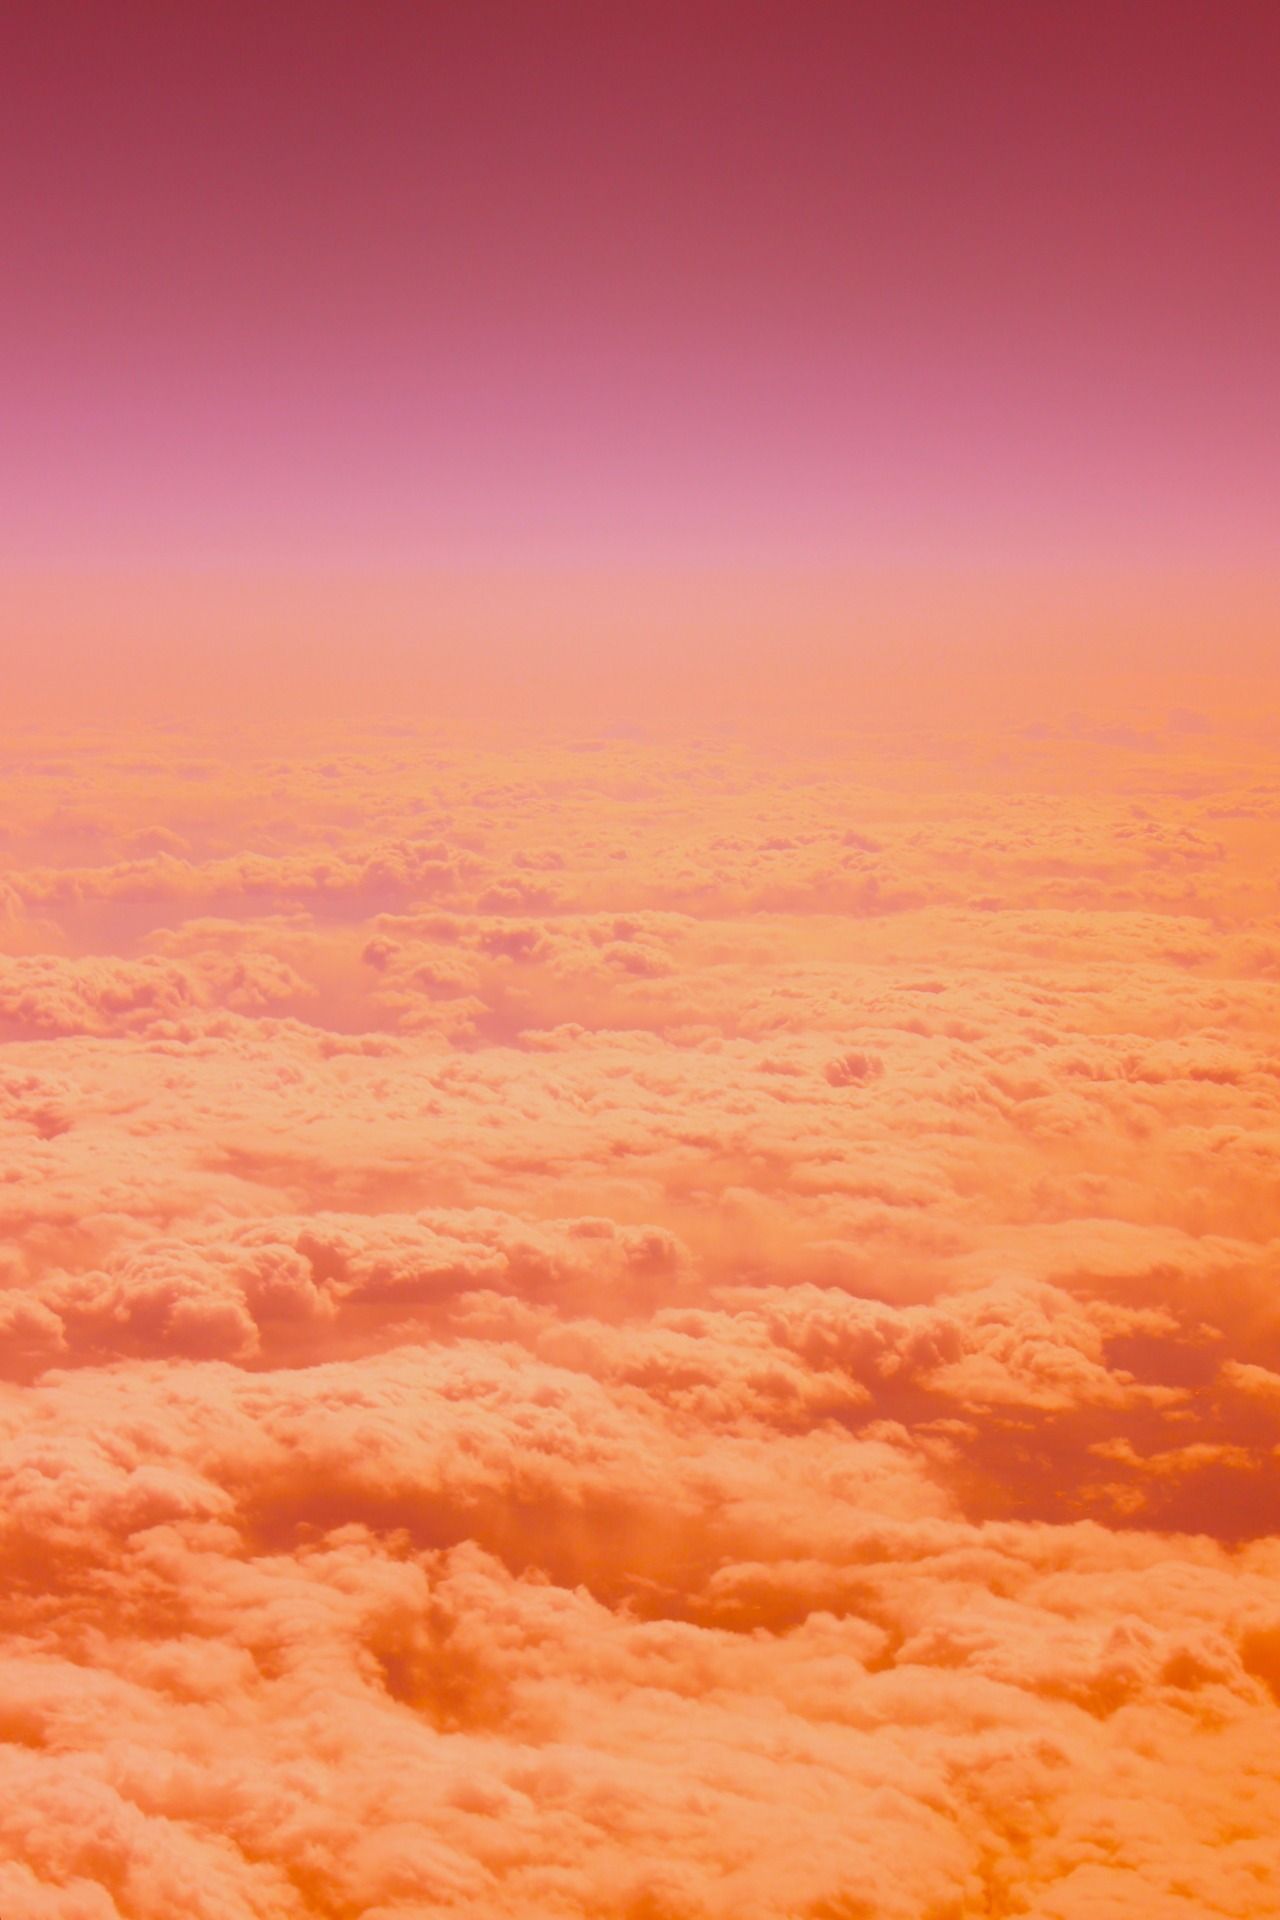 A plane flying over the clouds in an orange sky - Orange